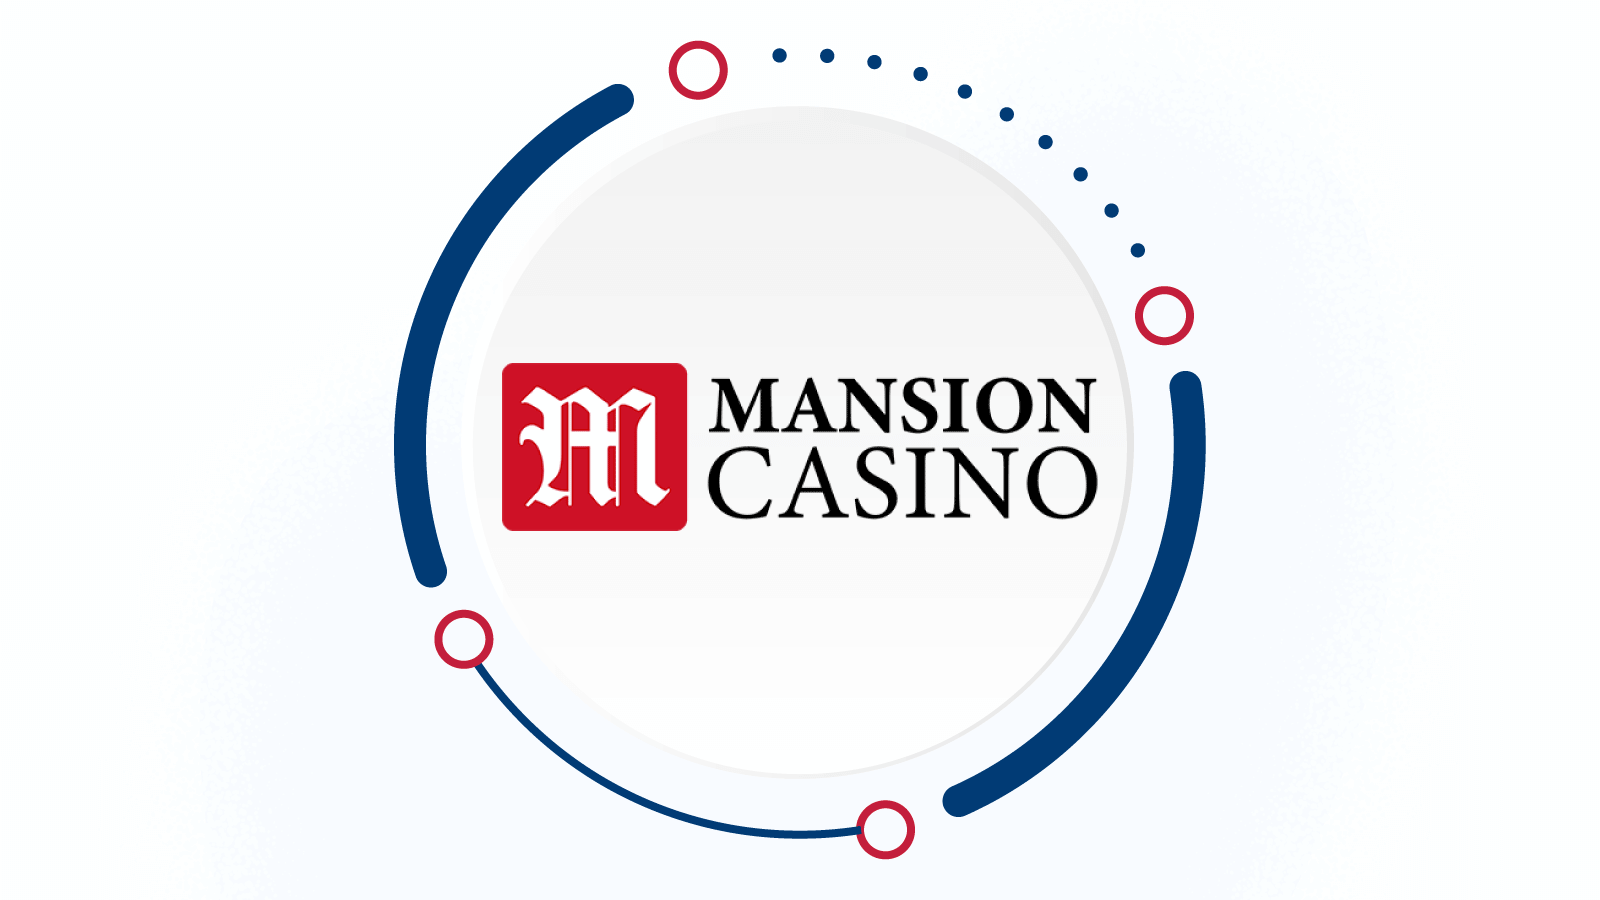 Mansion Casino – Best paying online casino for unlimited cashouts